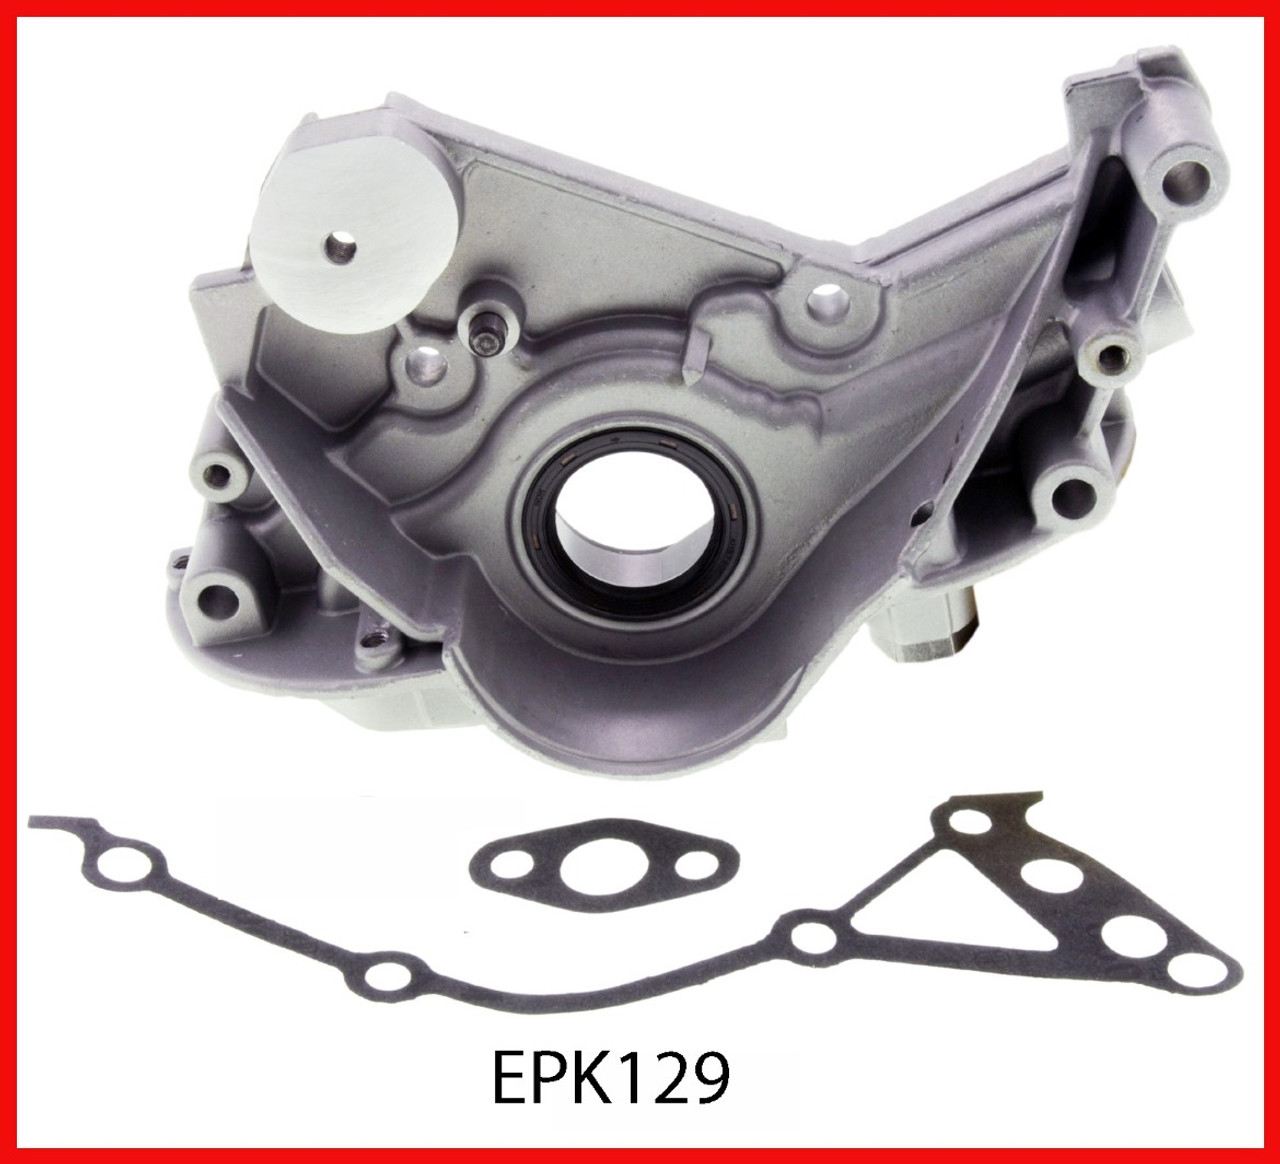 Oil Pump - 1998 Plymouth Voyager 3.0L (EPK129.I88)